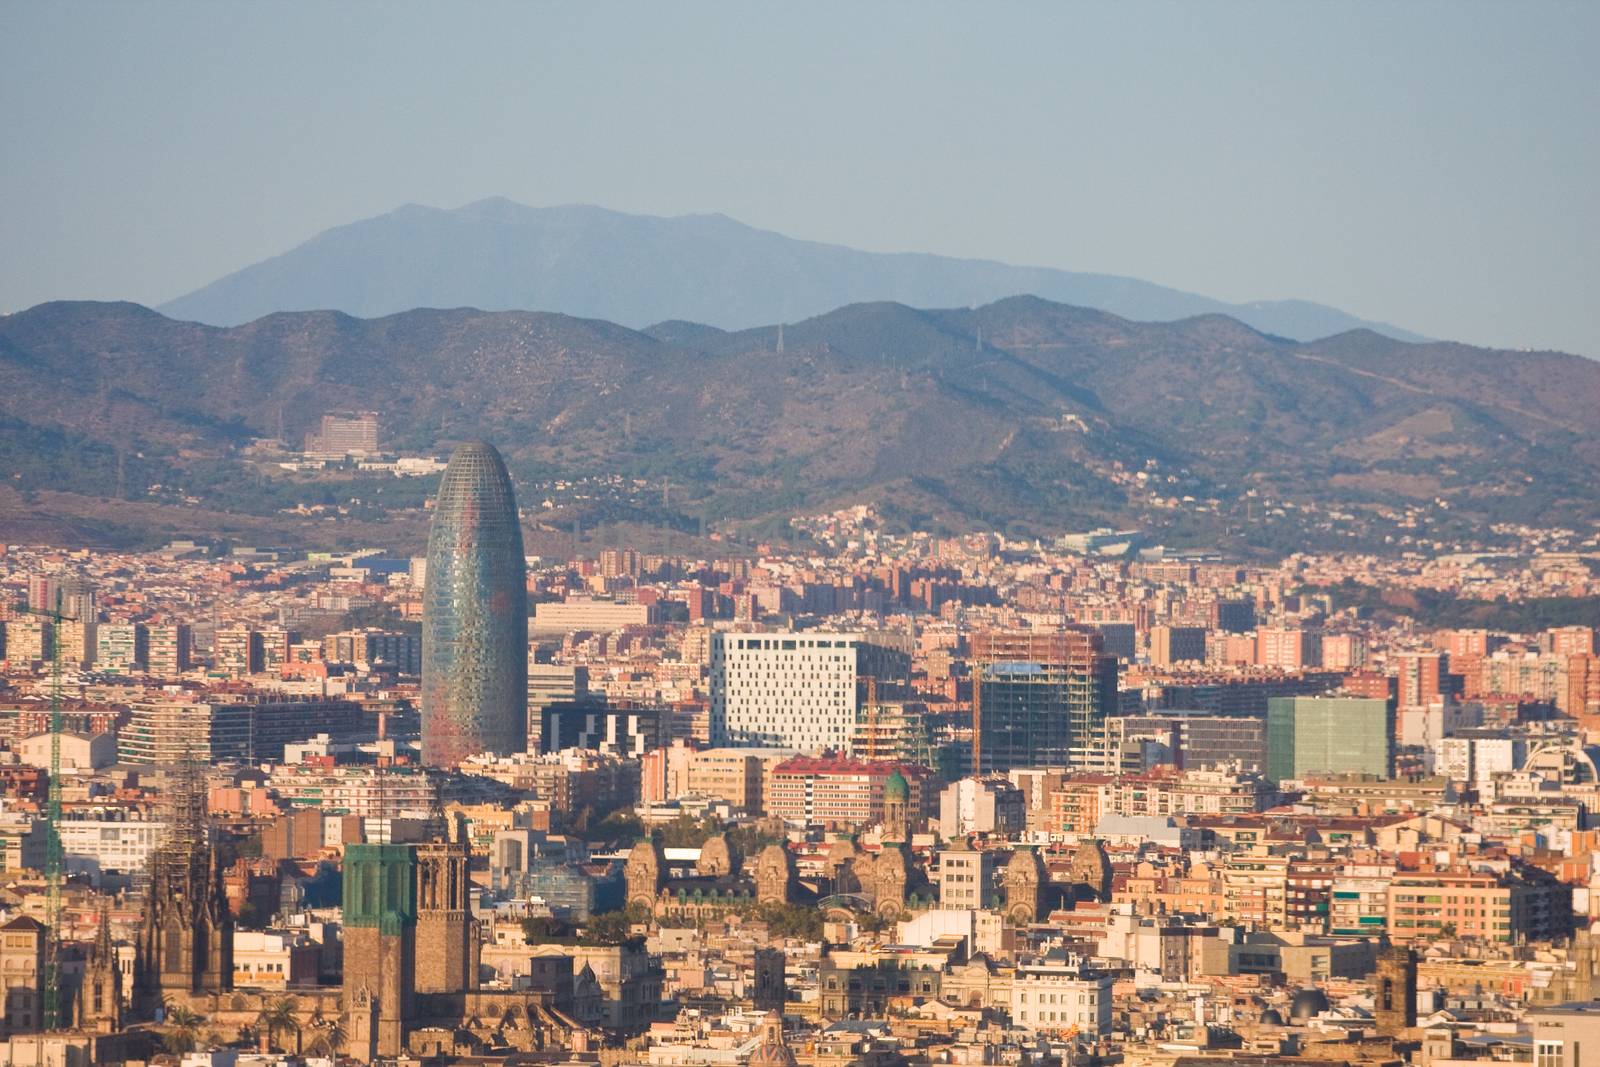 Panoramic view of Barcelona from Parc de Montjuic